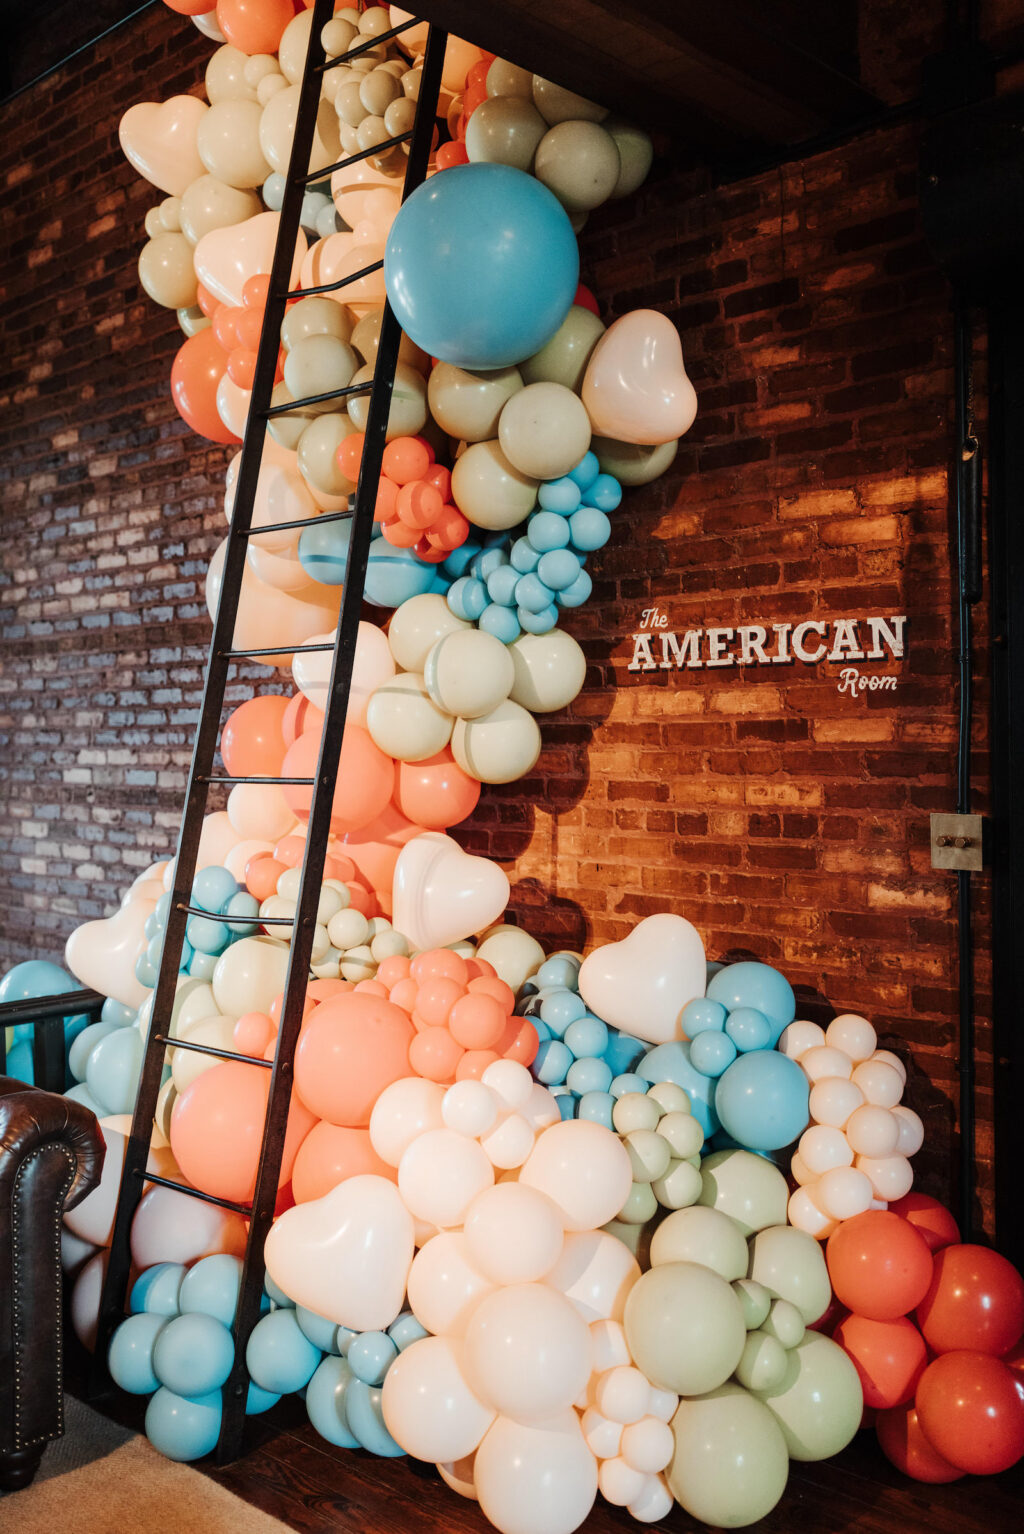 Whimsical Vibrant Blue, Green and Orange Balloon Wall Ideas for Industrial Wedding Venue | JC Newman Cigar Factory Tampa Florida Venue